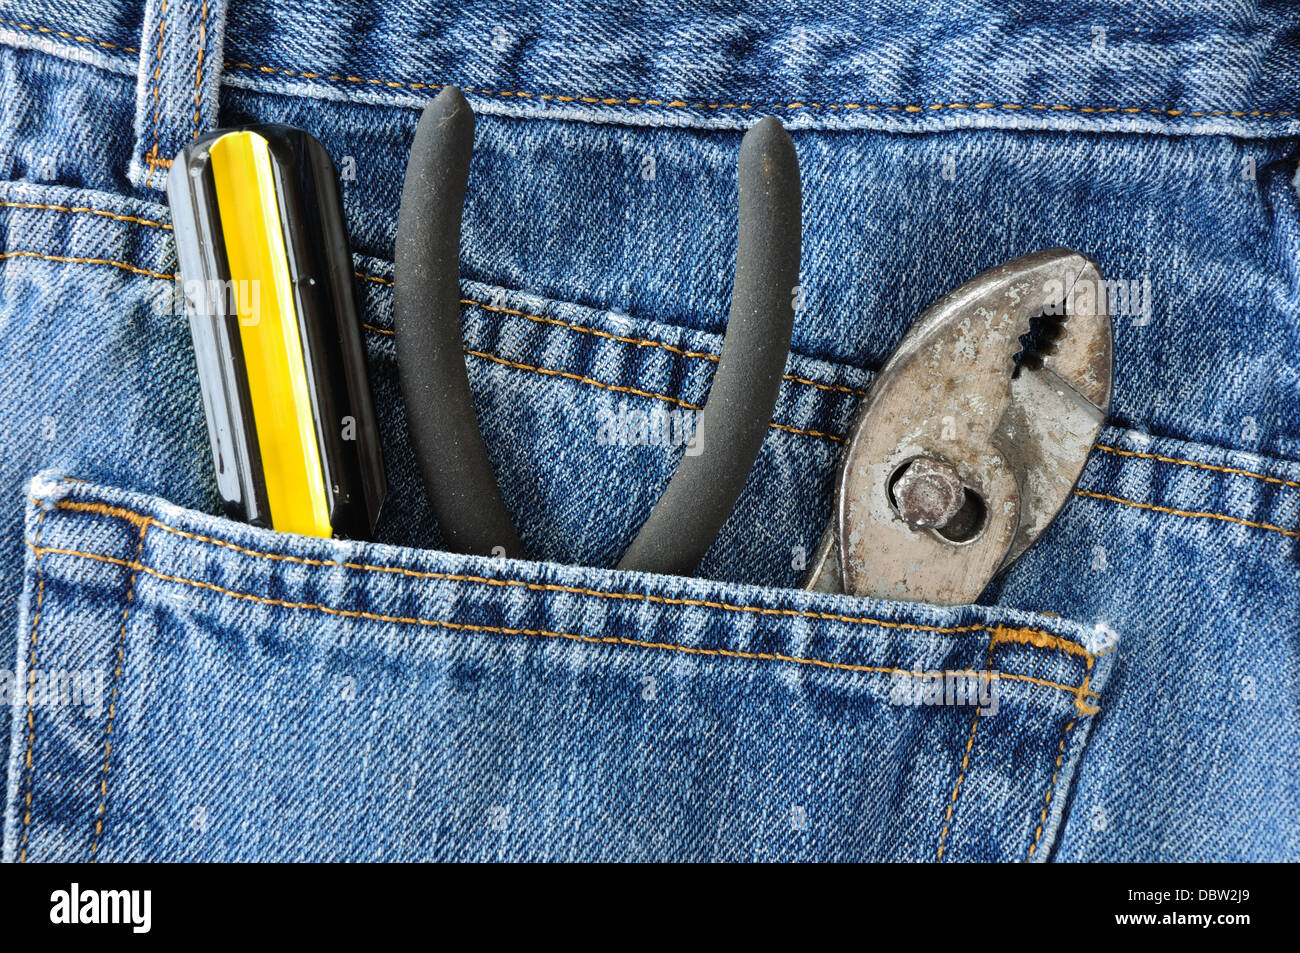 Hand tools in a back pocket of a pair of denim jeans Stock Photo